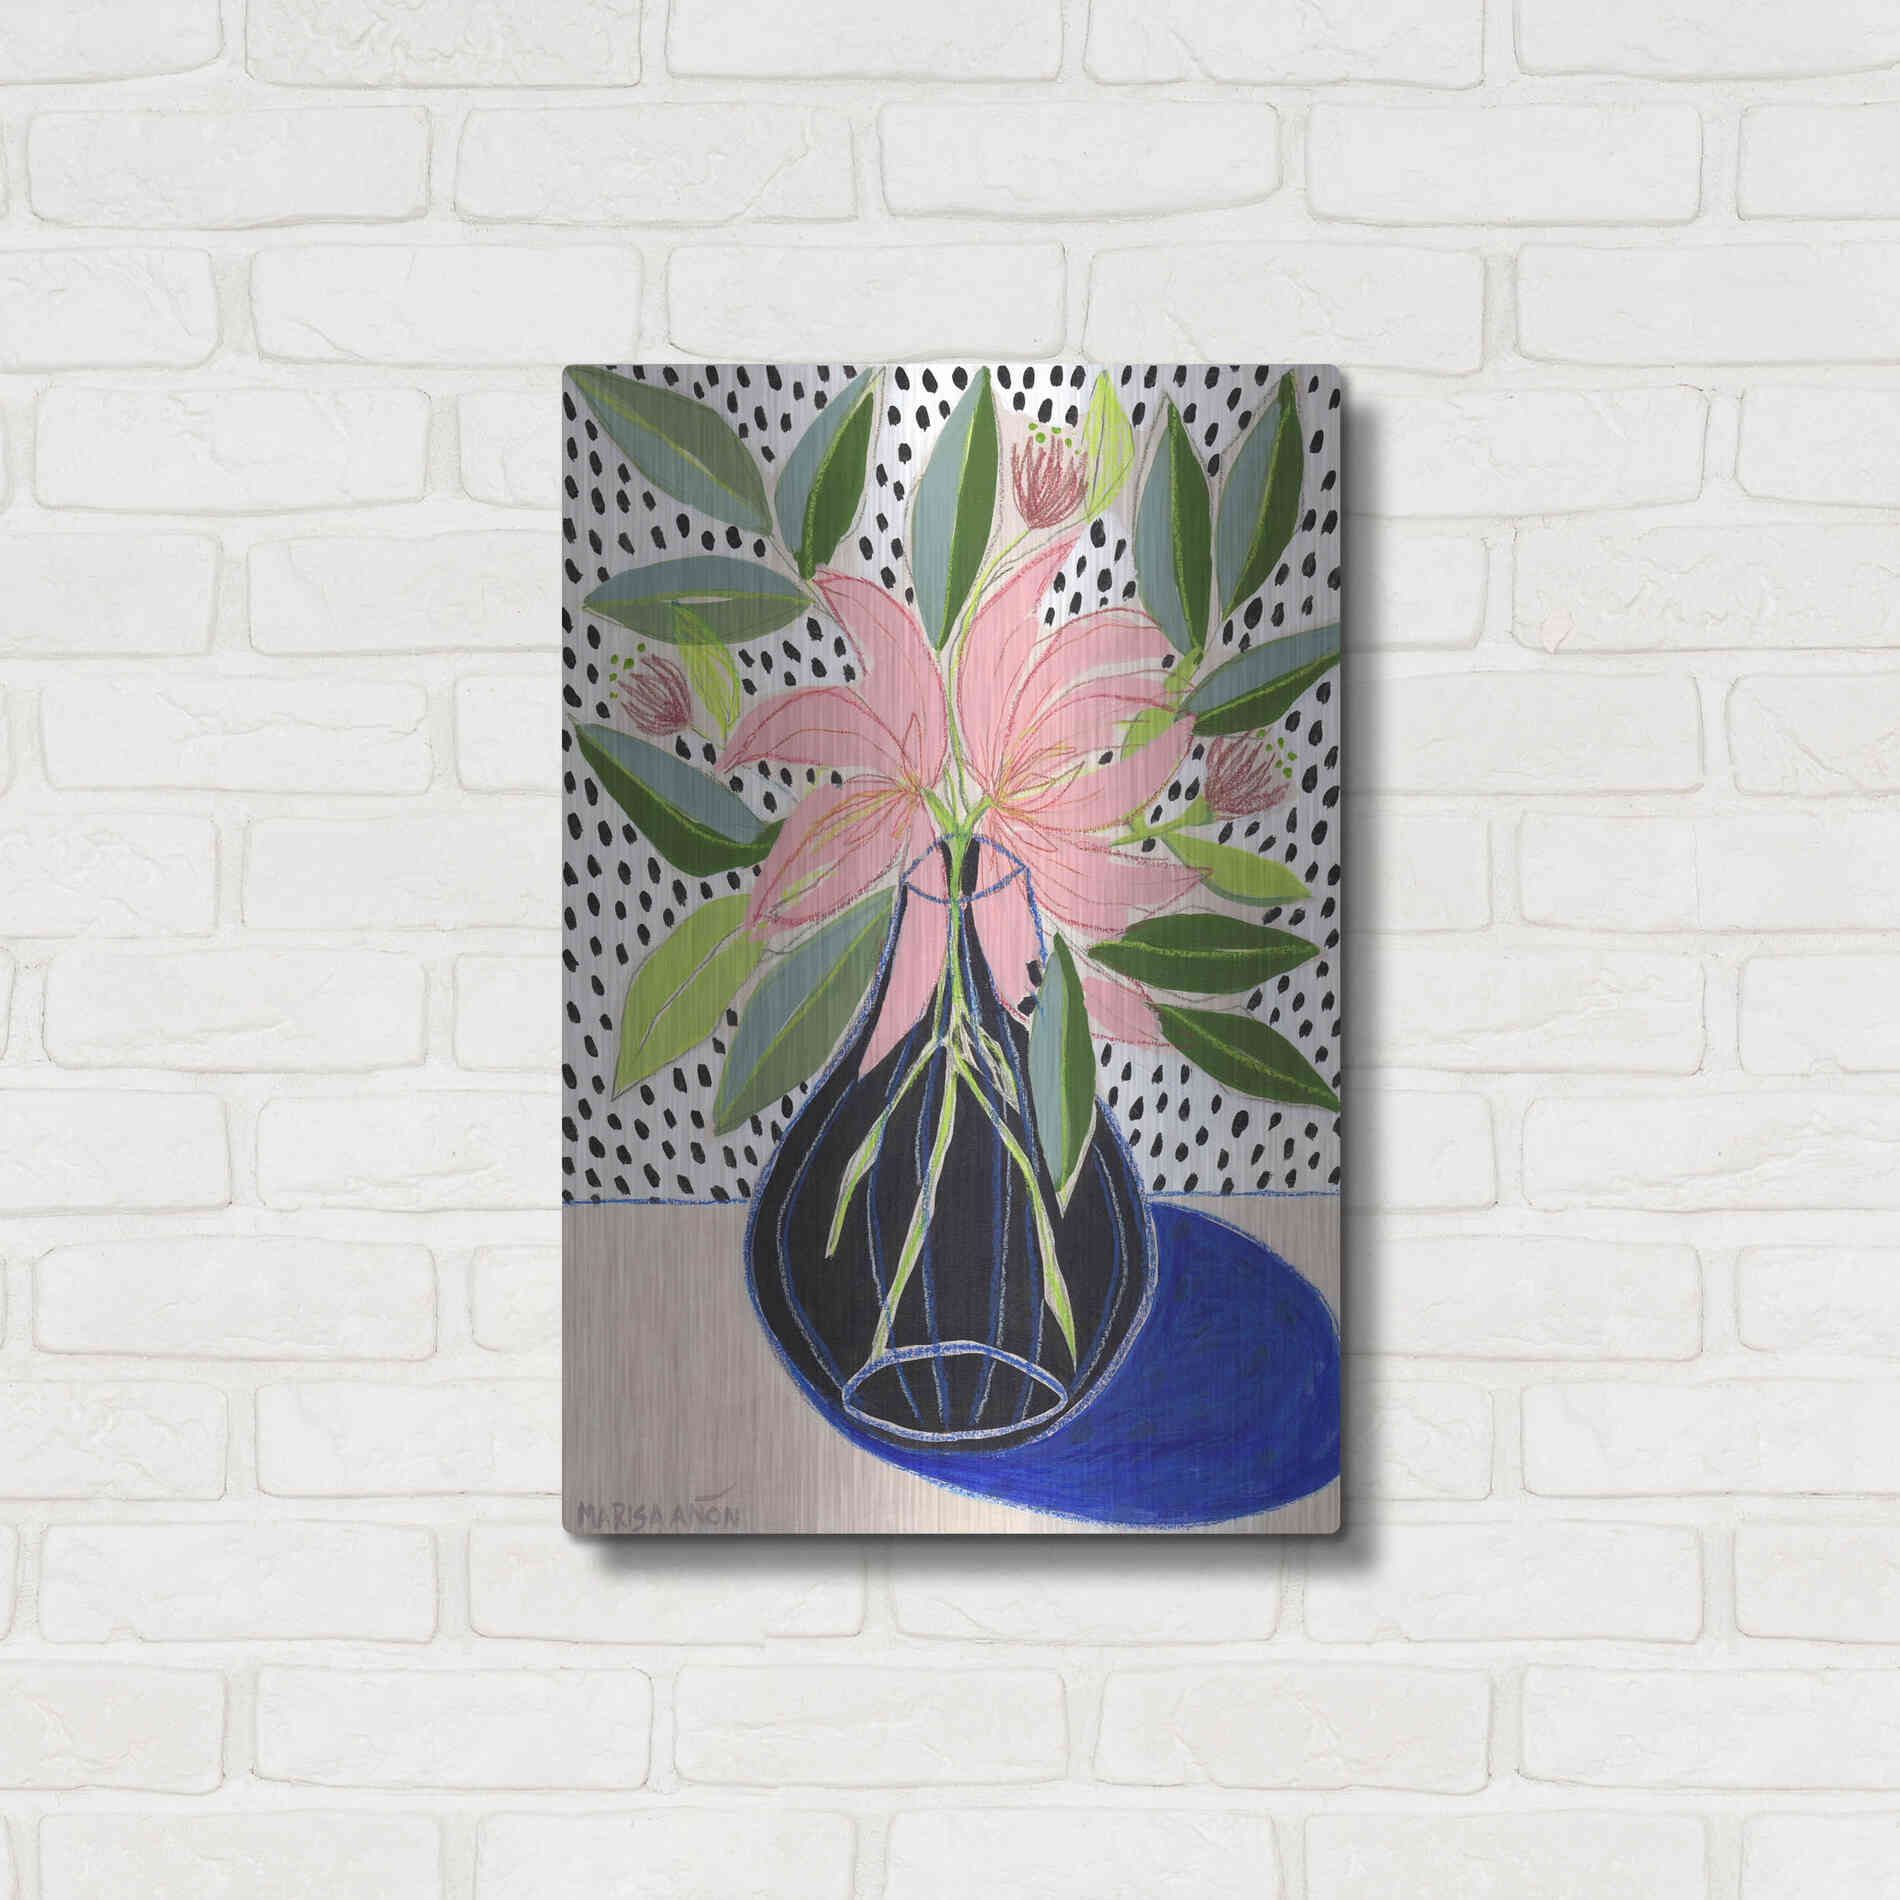 Luxe Metal Art 'Spring Florals 7' by Marisa Anon, Metal Wall Art,16x24